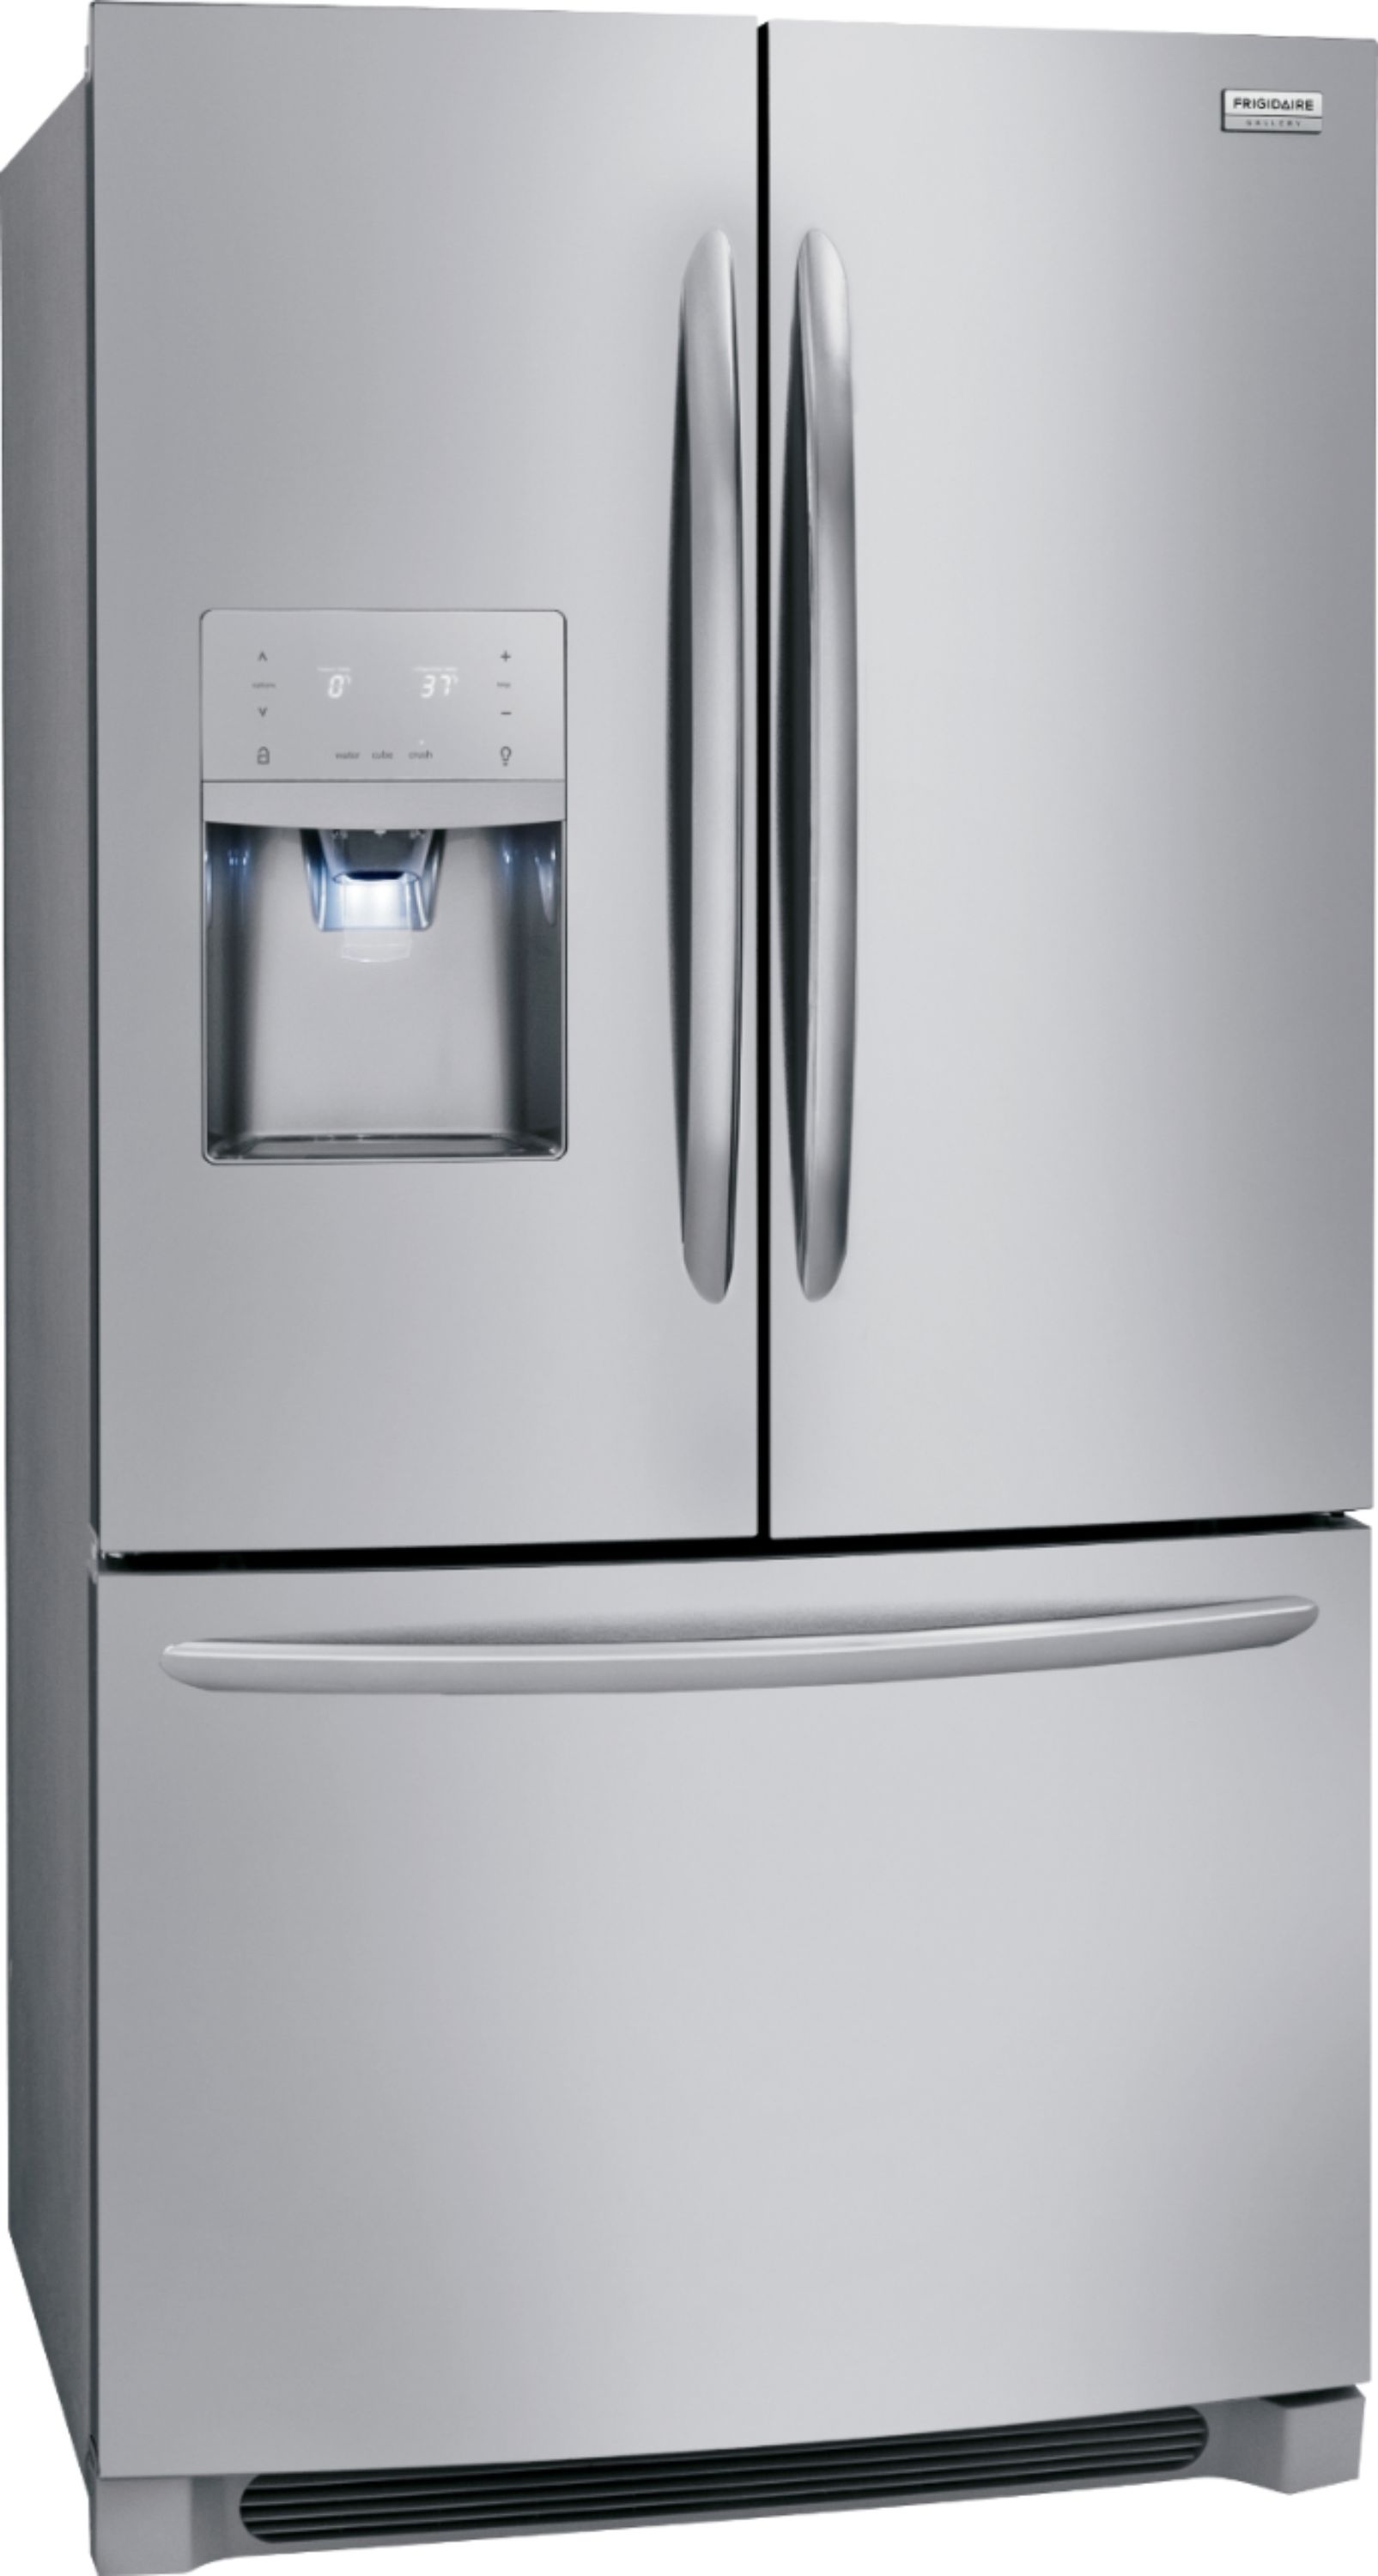 Angle View: Frigidaire - Gallery 26.8 Cu. Ft. French Door Refrigerator - Stainless steel